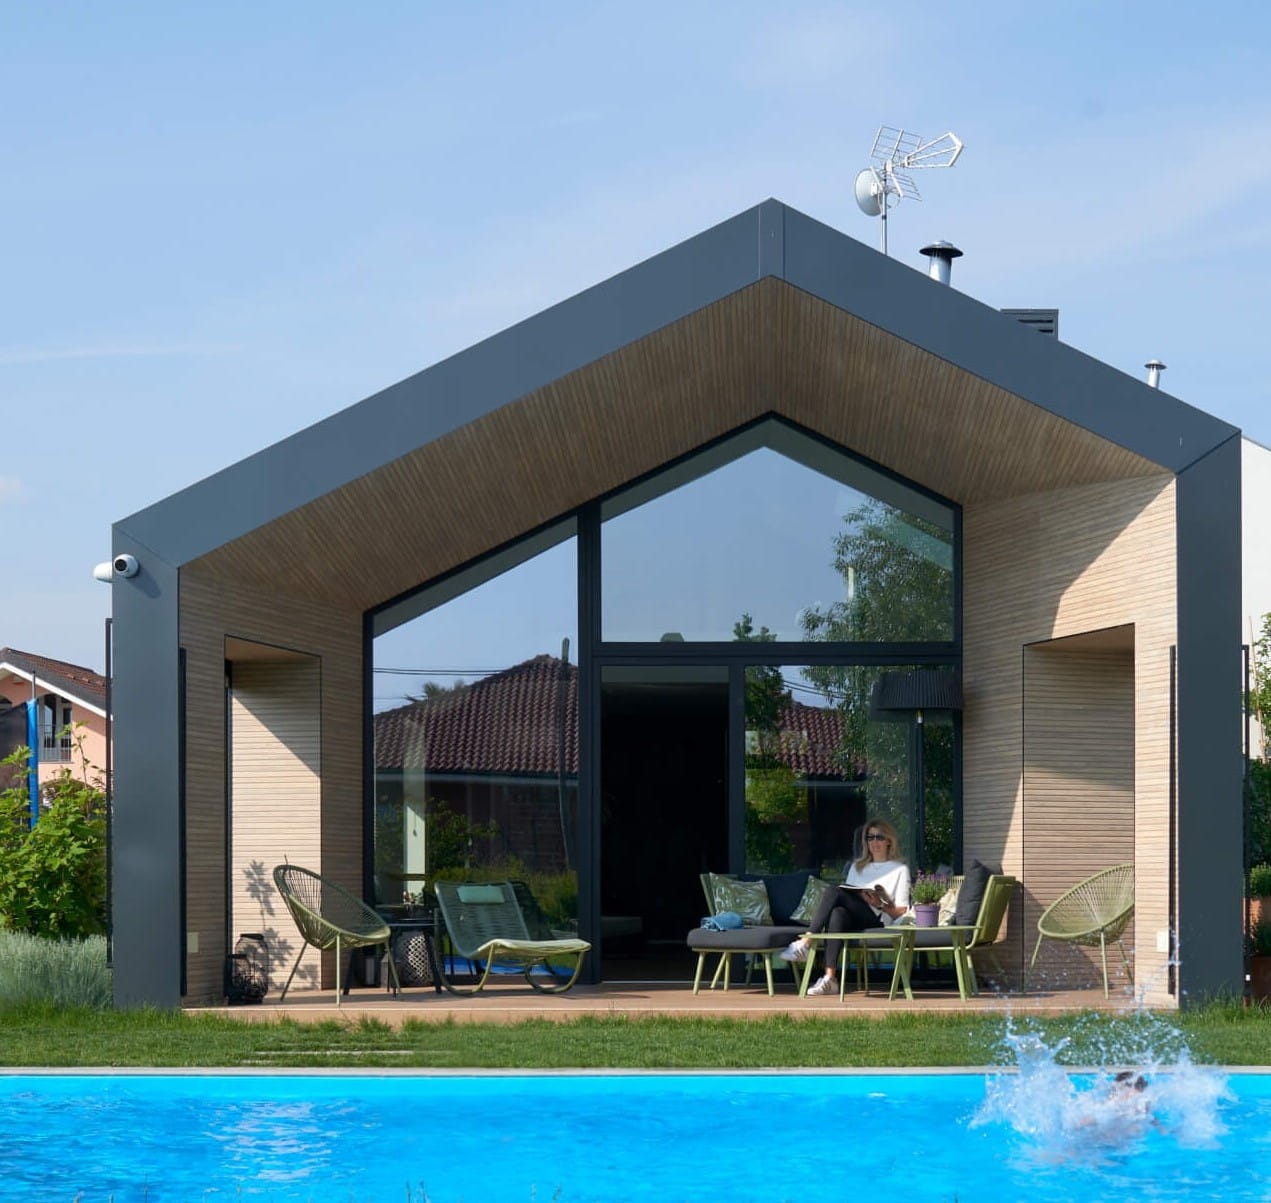 A front view of a new modern house with swimming pool